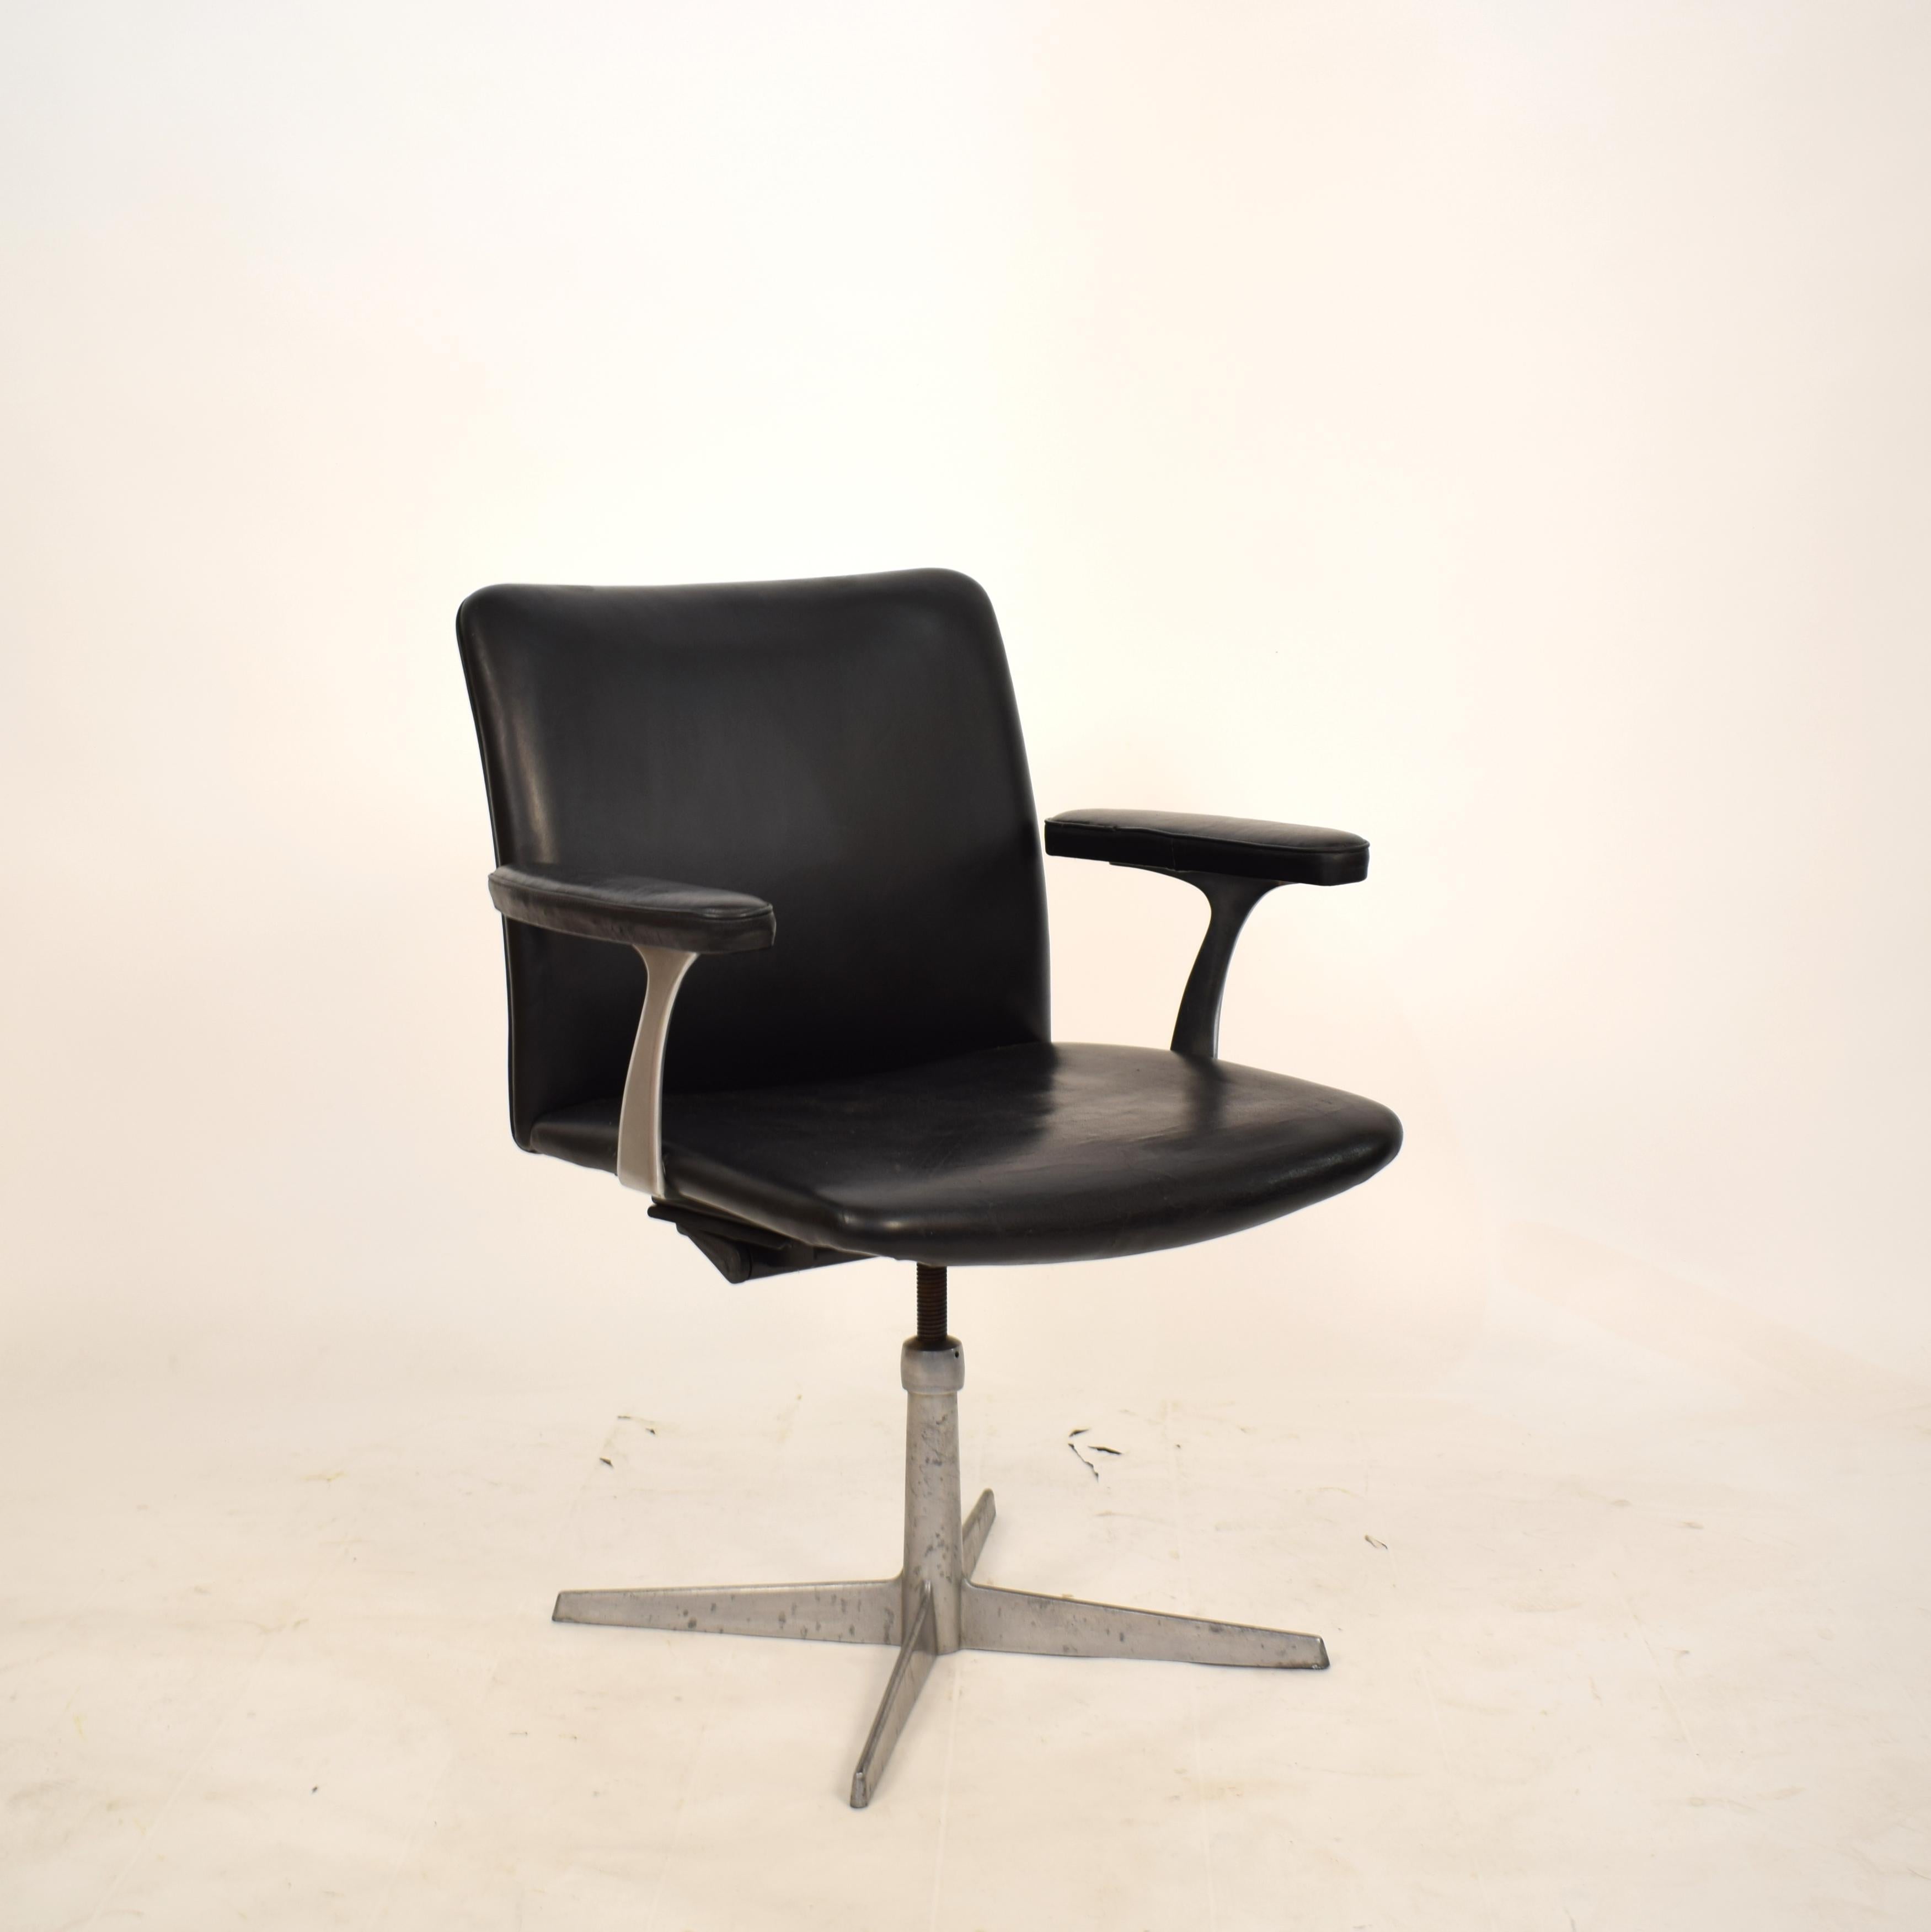 Midcentury Scandinavian Armchair in Black Leather and Aluminum, circa 1970 For Sale 7